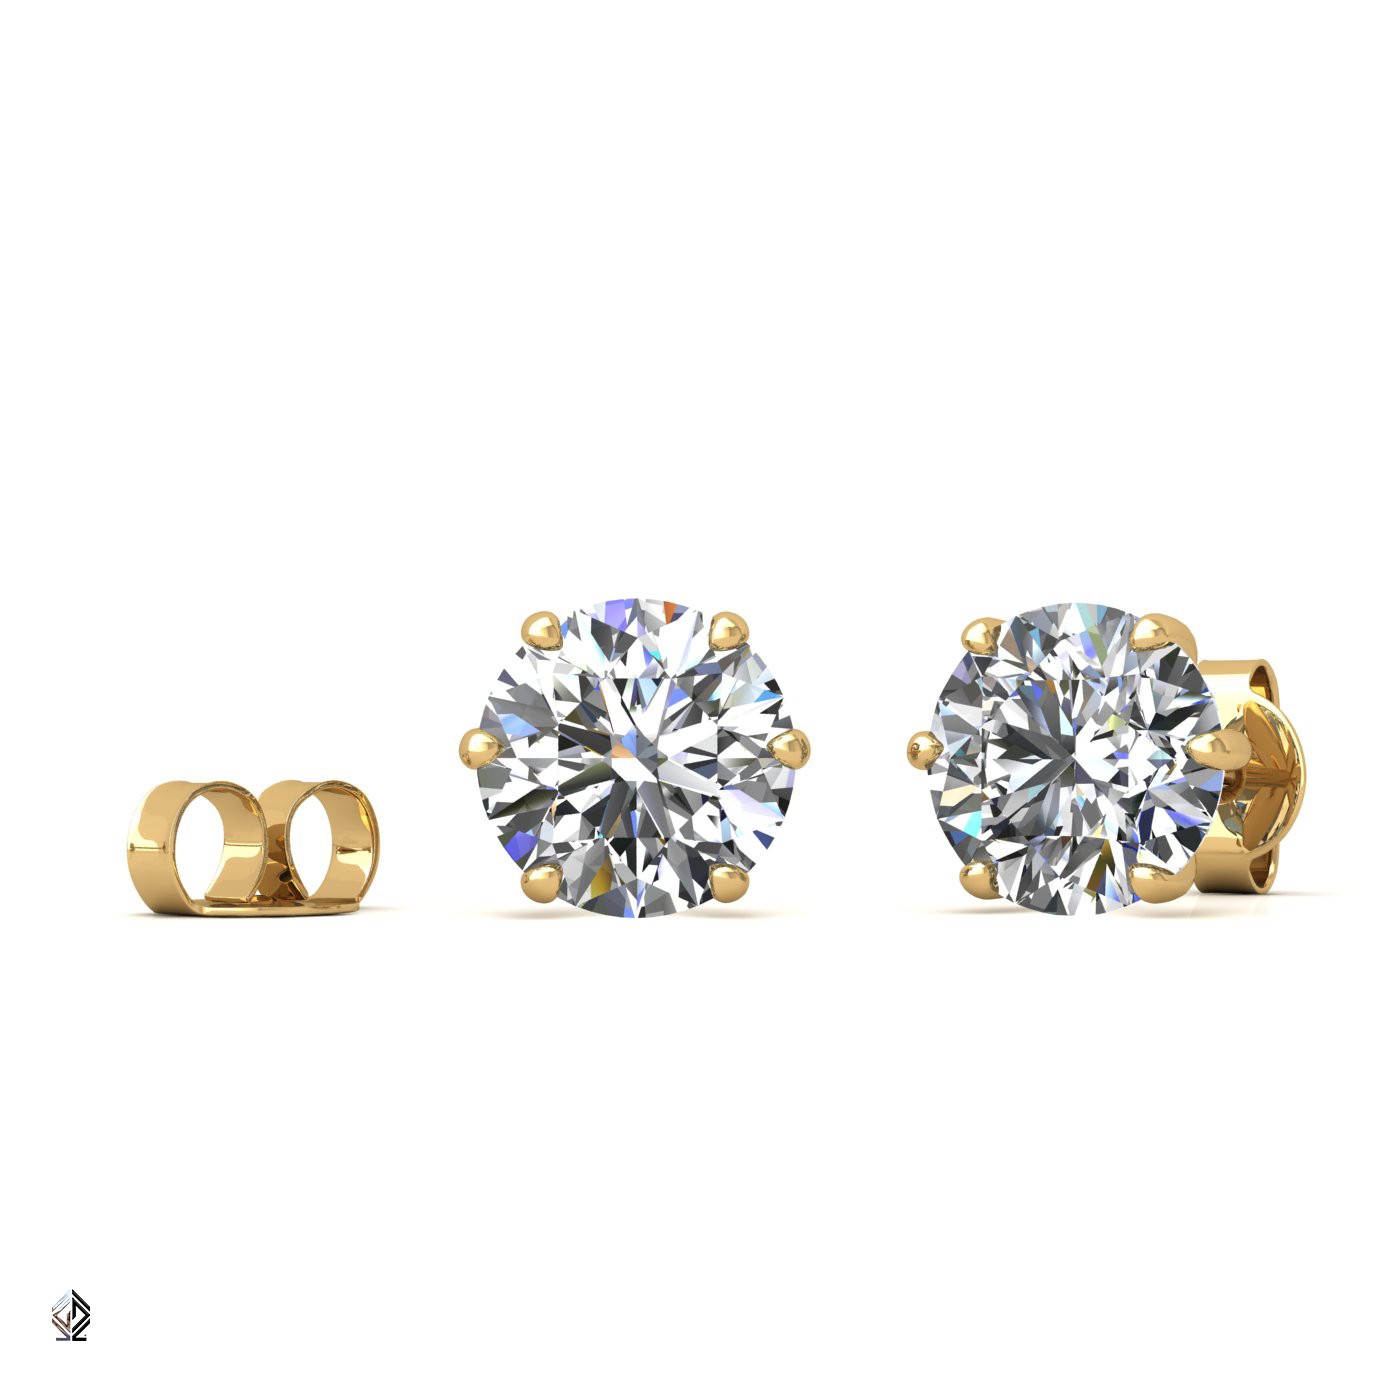 18k yellow gold 1.2 ct each (2,4 tcw) 6 prongs round shape diamond earrings Photos & images